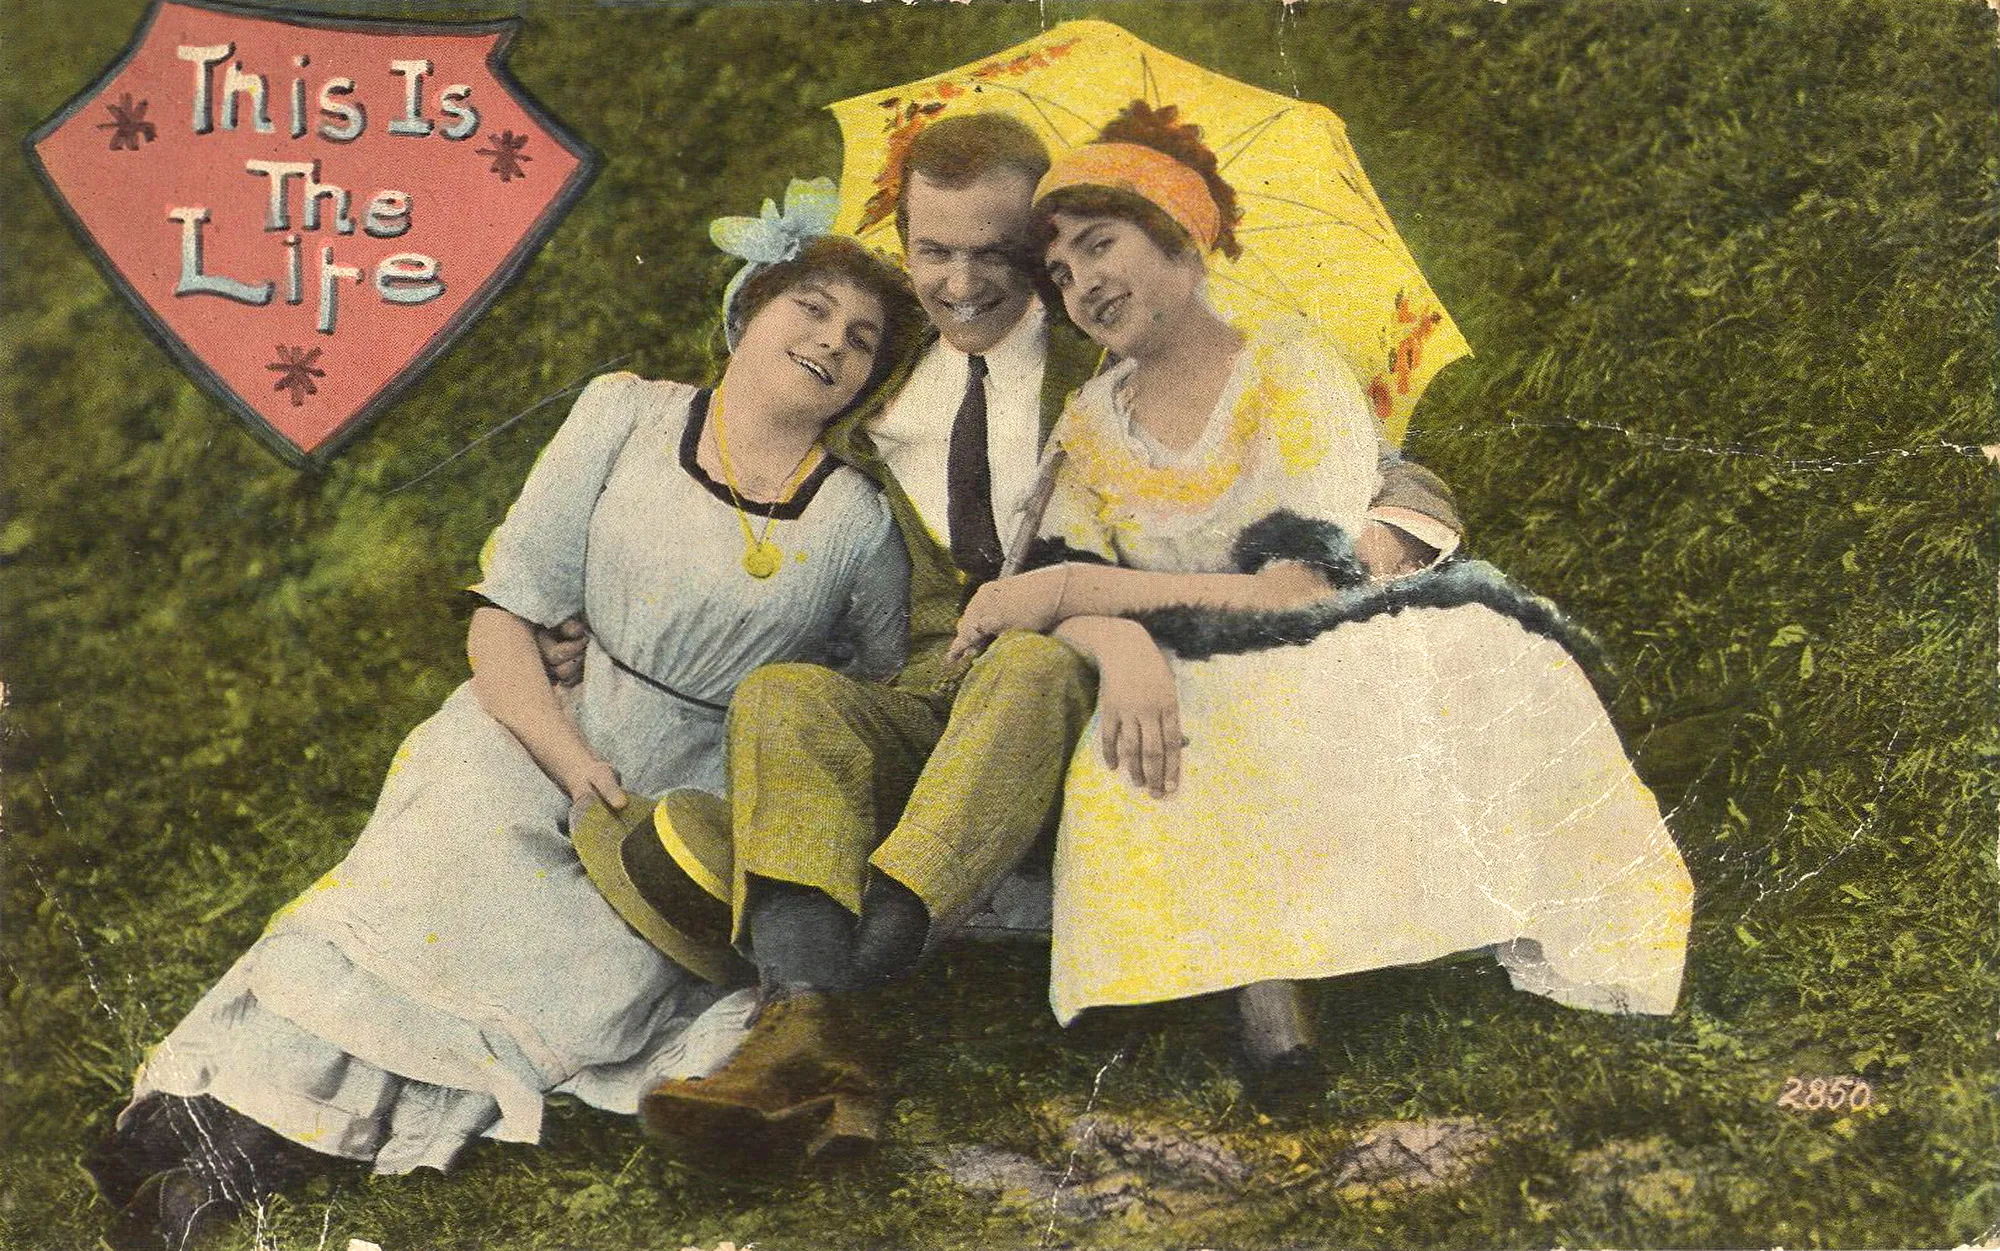 Postcard labeled “This Is The Life”, showing man between two women; the three are seated out-of-doors, all smiling, dressed in fashion of early 20th century. One woman holds a yellow parasol, the other the man’s straw boater hat.